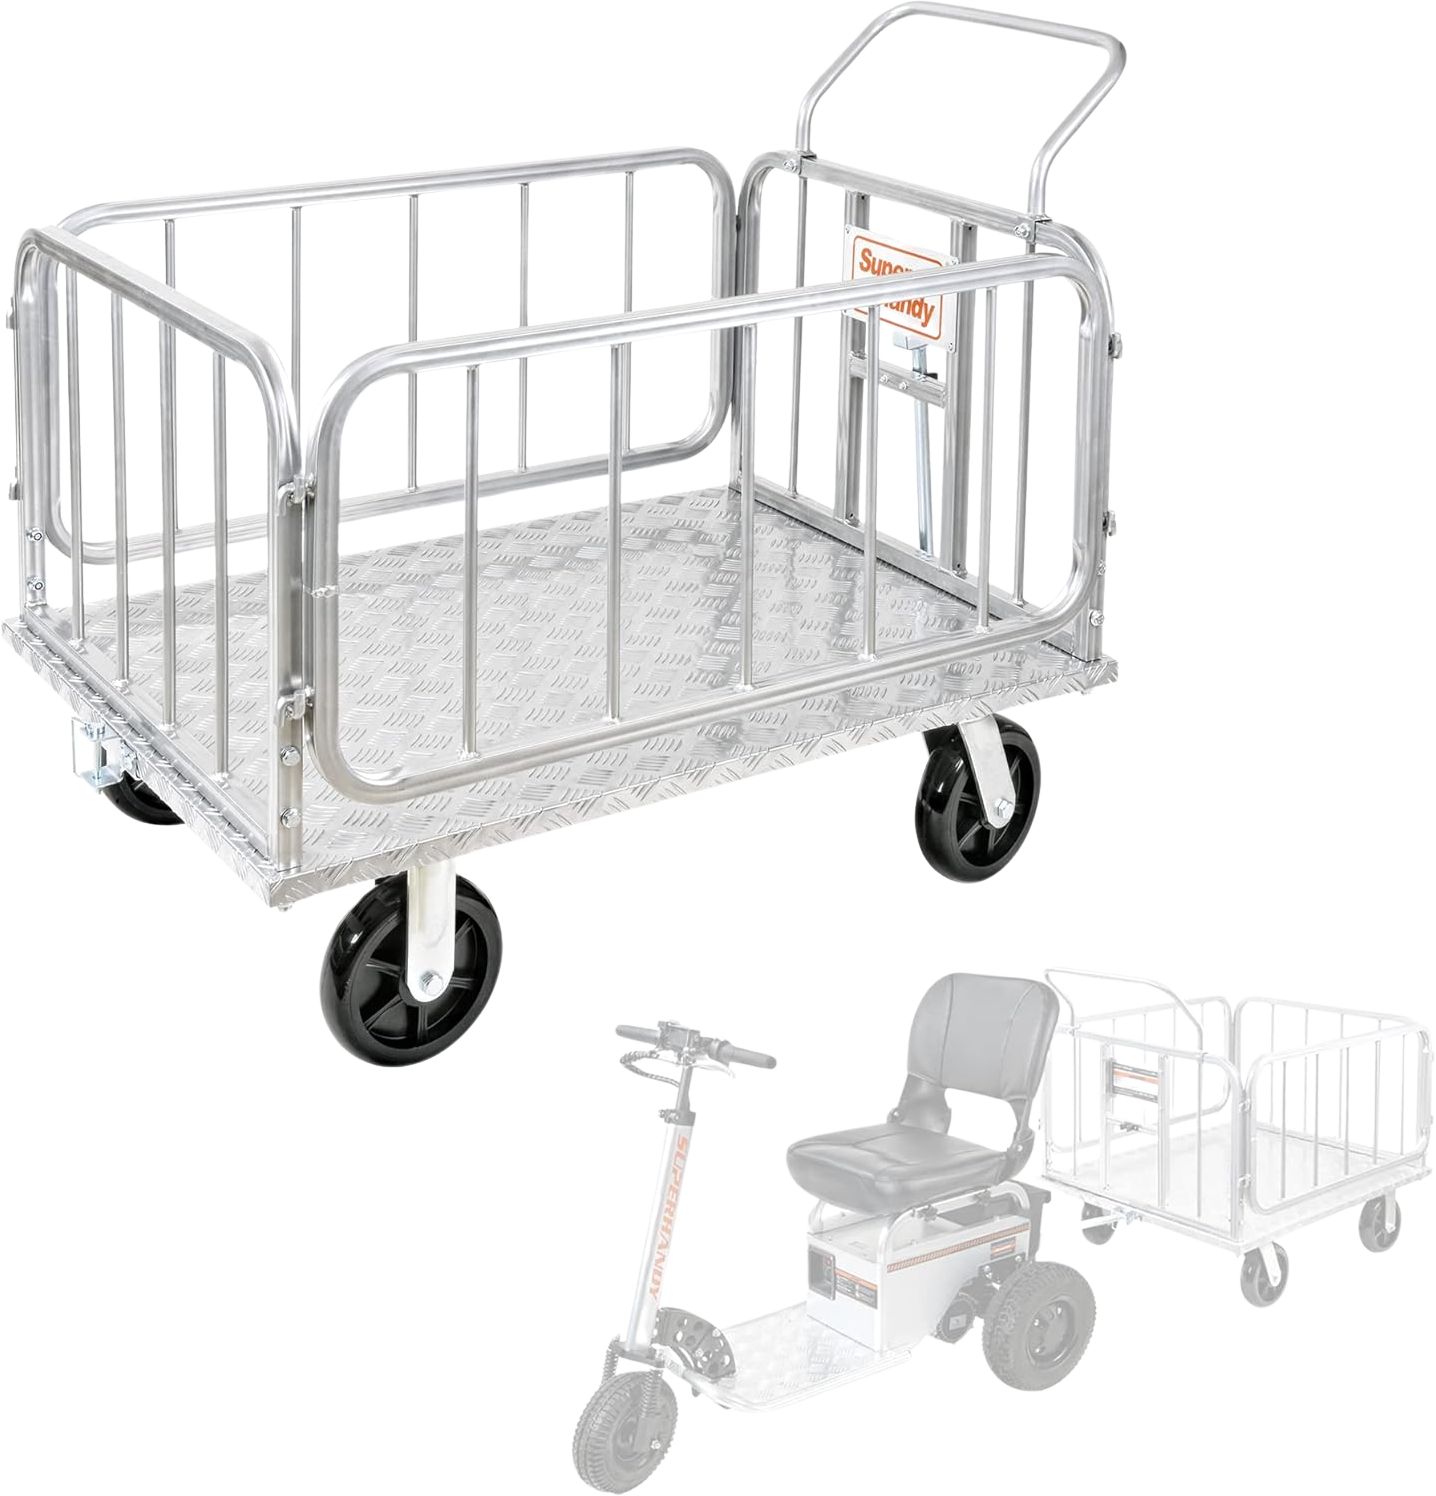 Super Handy GUO099 Cargo Trailer Utility Cart 1200 lbs Capacity with Hitch 8